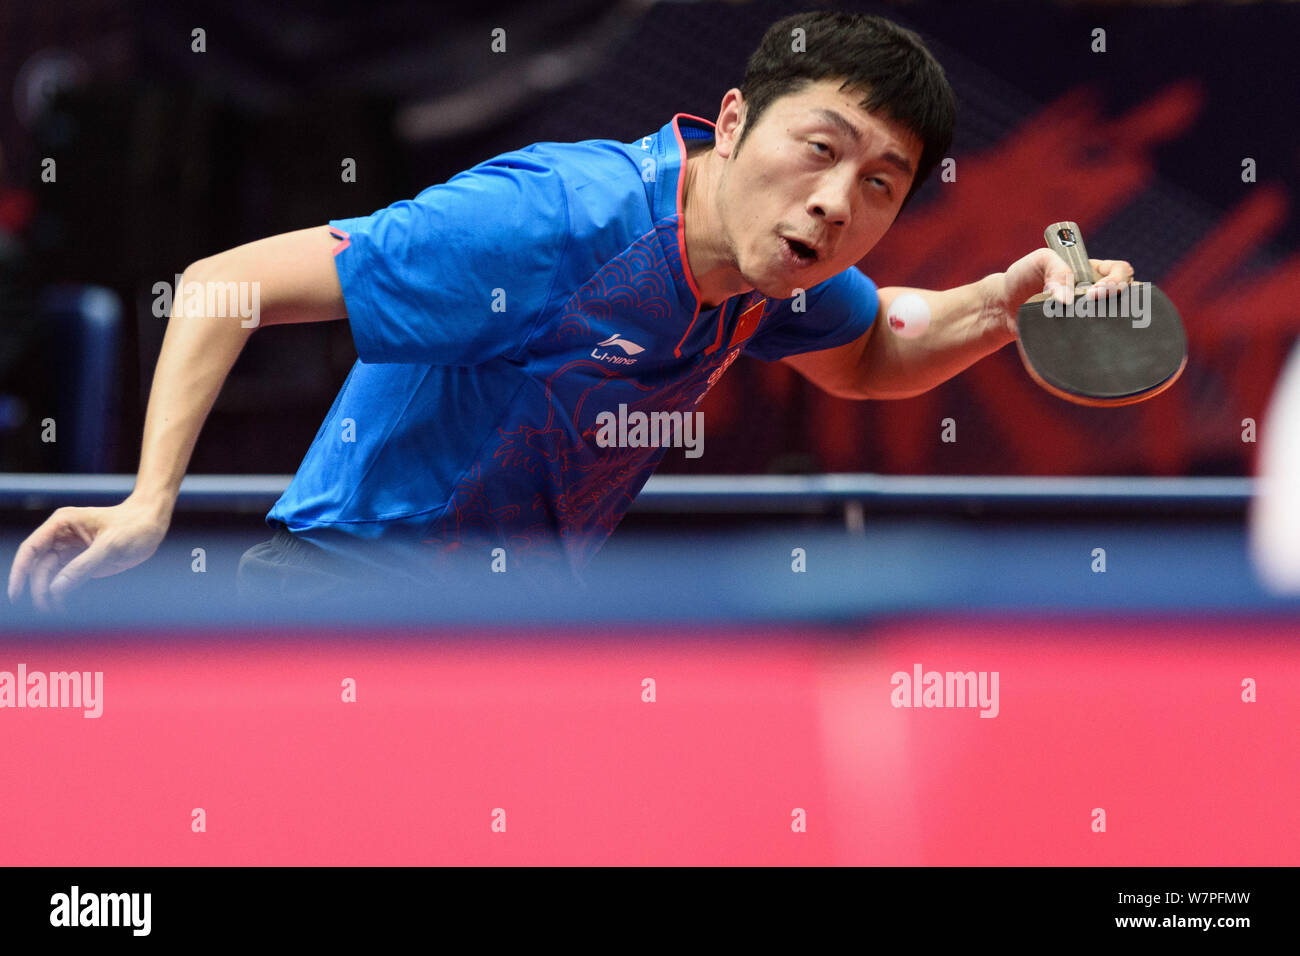 Xu Xin of China serves against Emmanuel Lebesson of France in the first round match of the Men's Singles during the Seamaster 2017 ITTF World Tour Pla Stock Photo